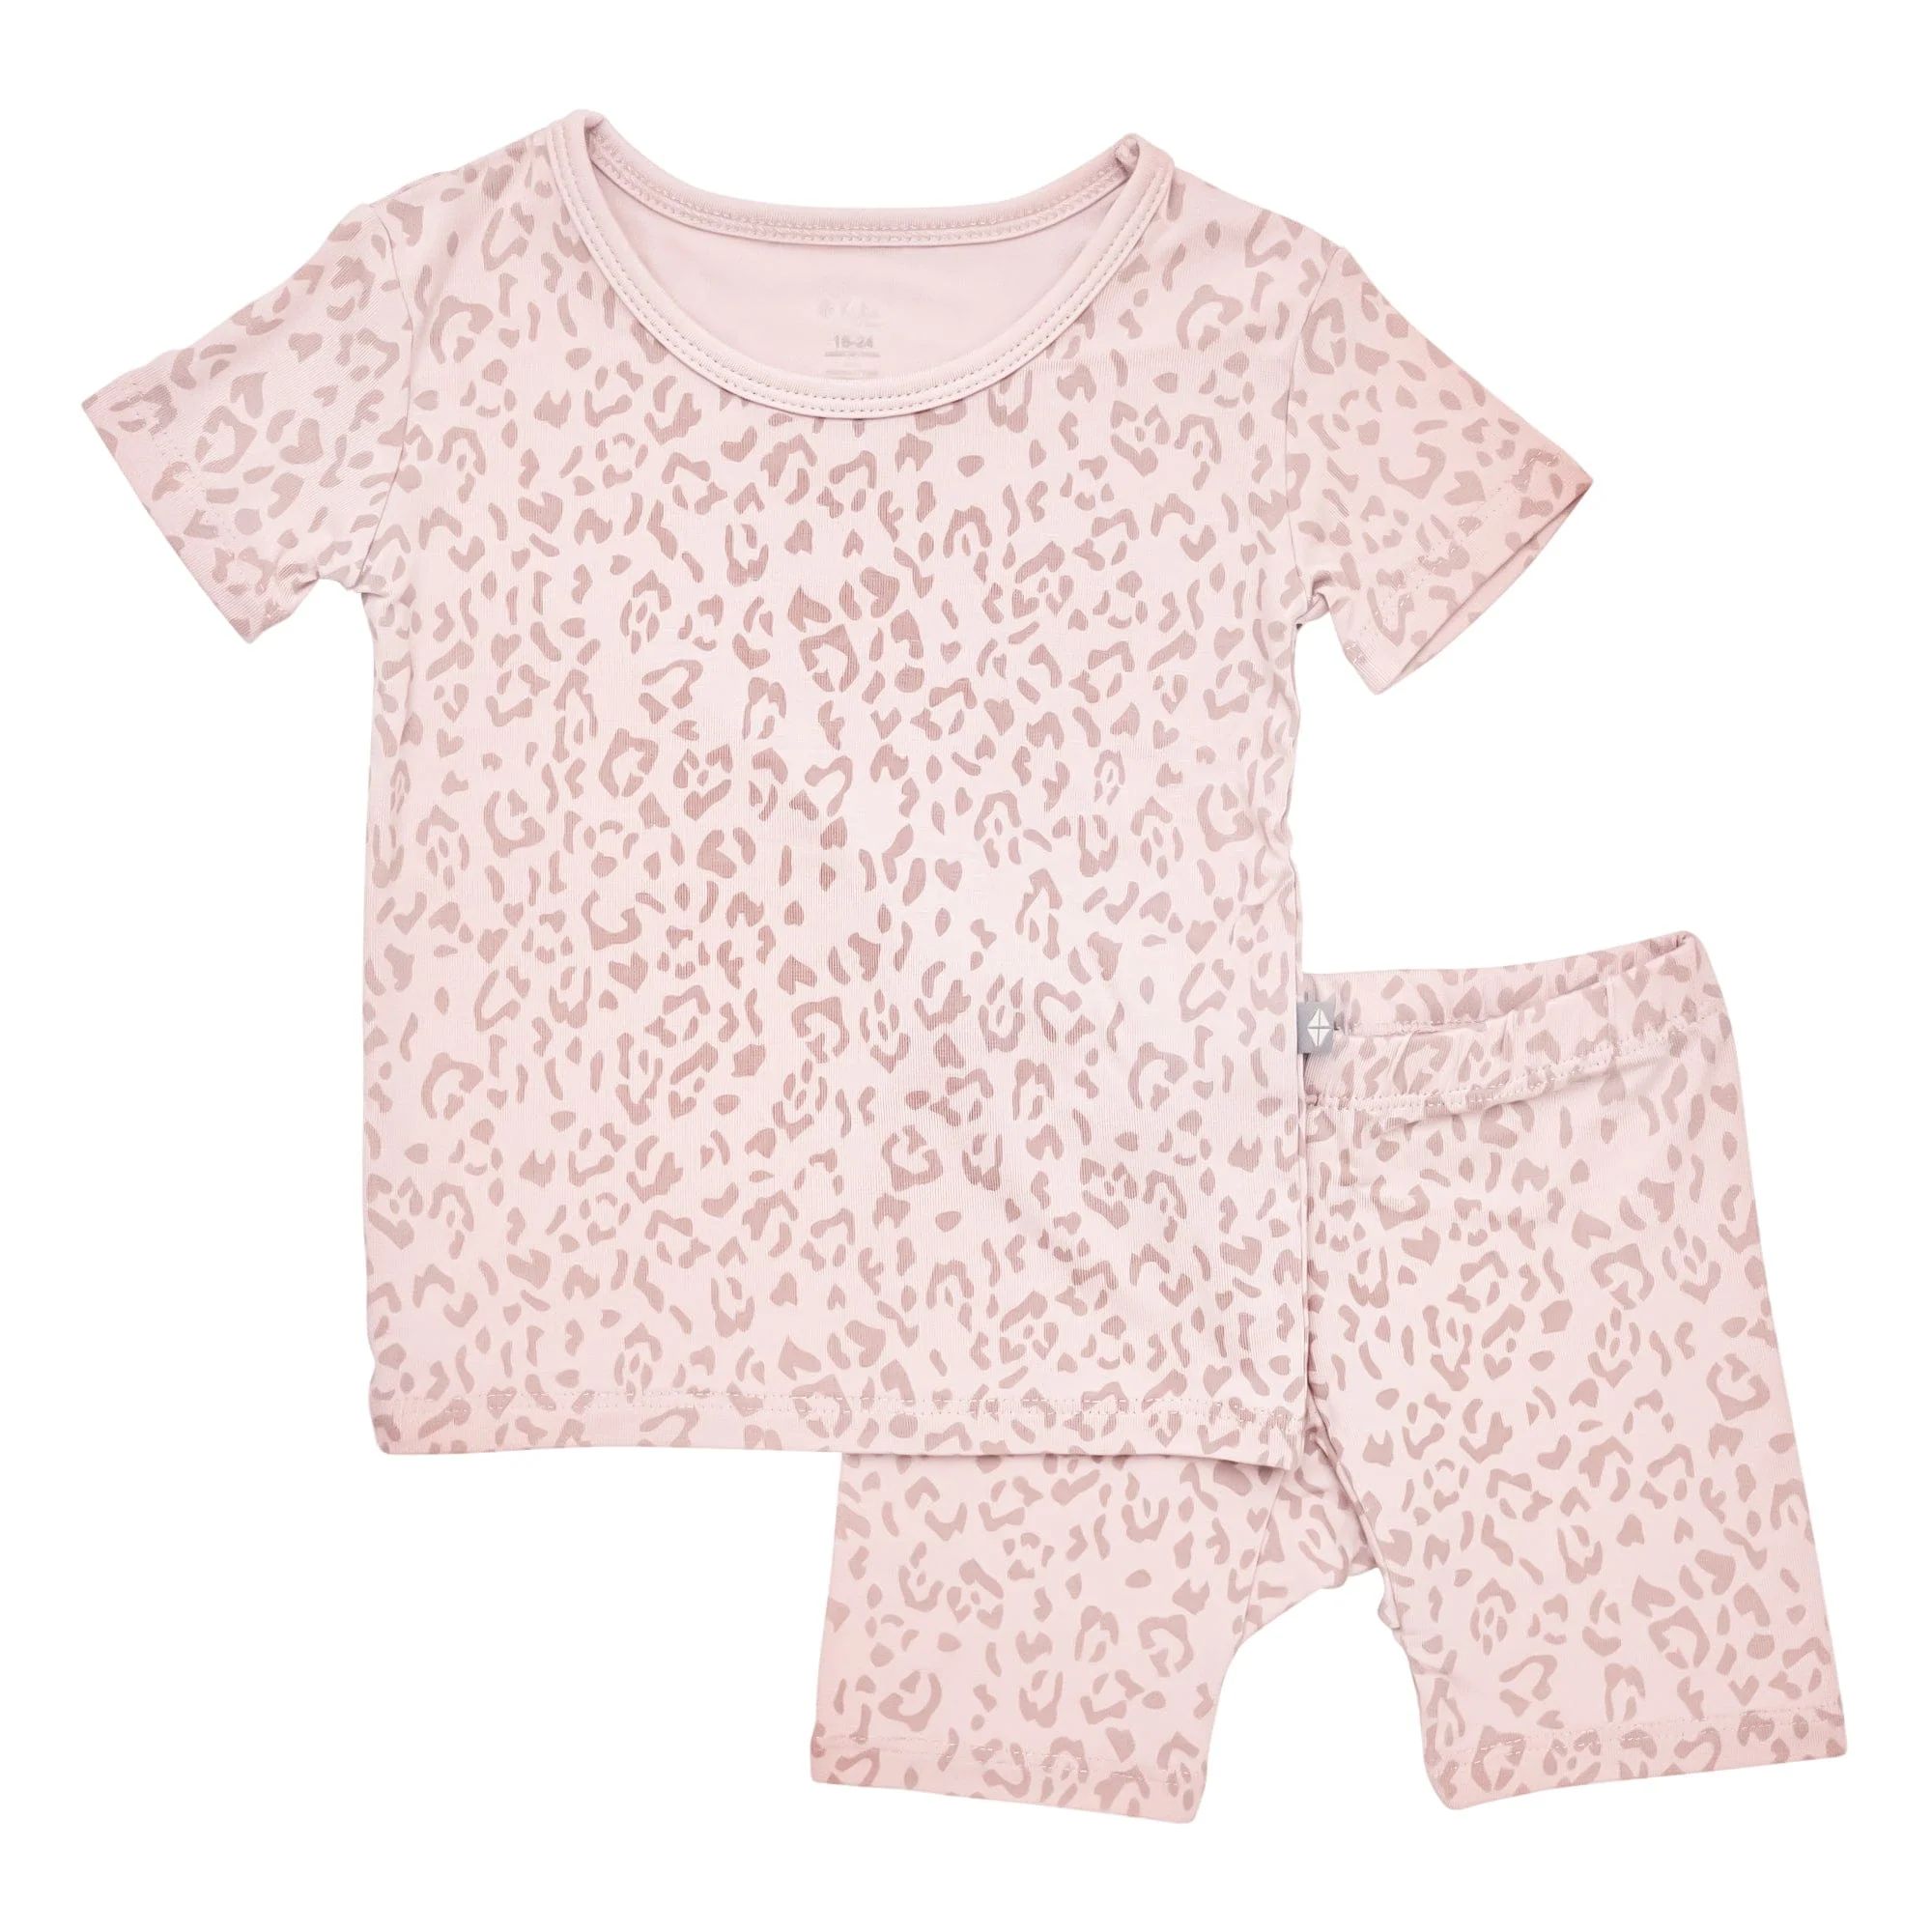 Short Sleeve Toddler Pajama Set in Small Blush Leopard | Kyte BABY